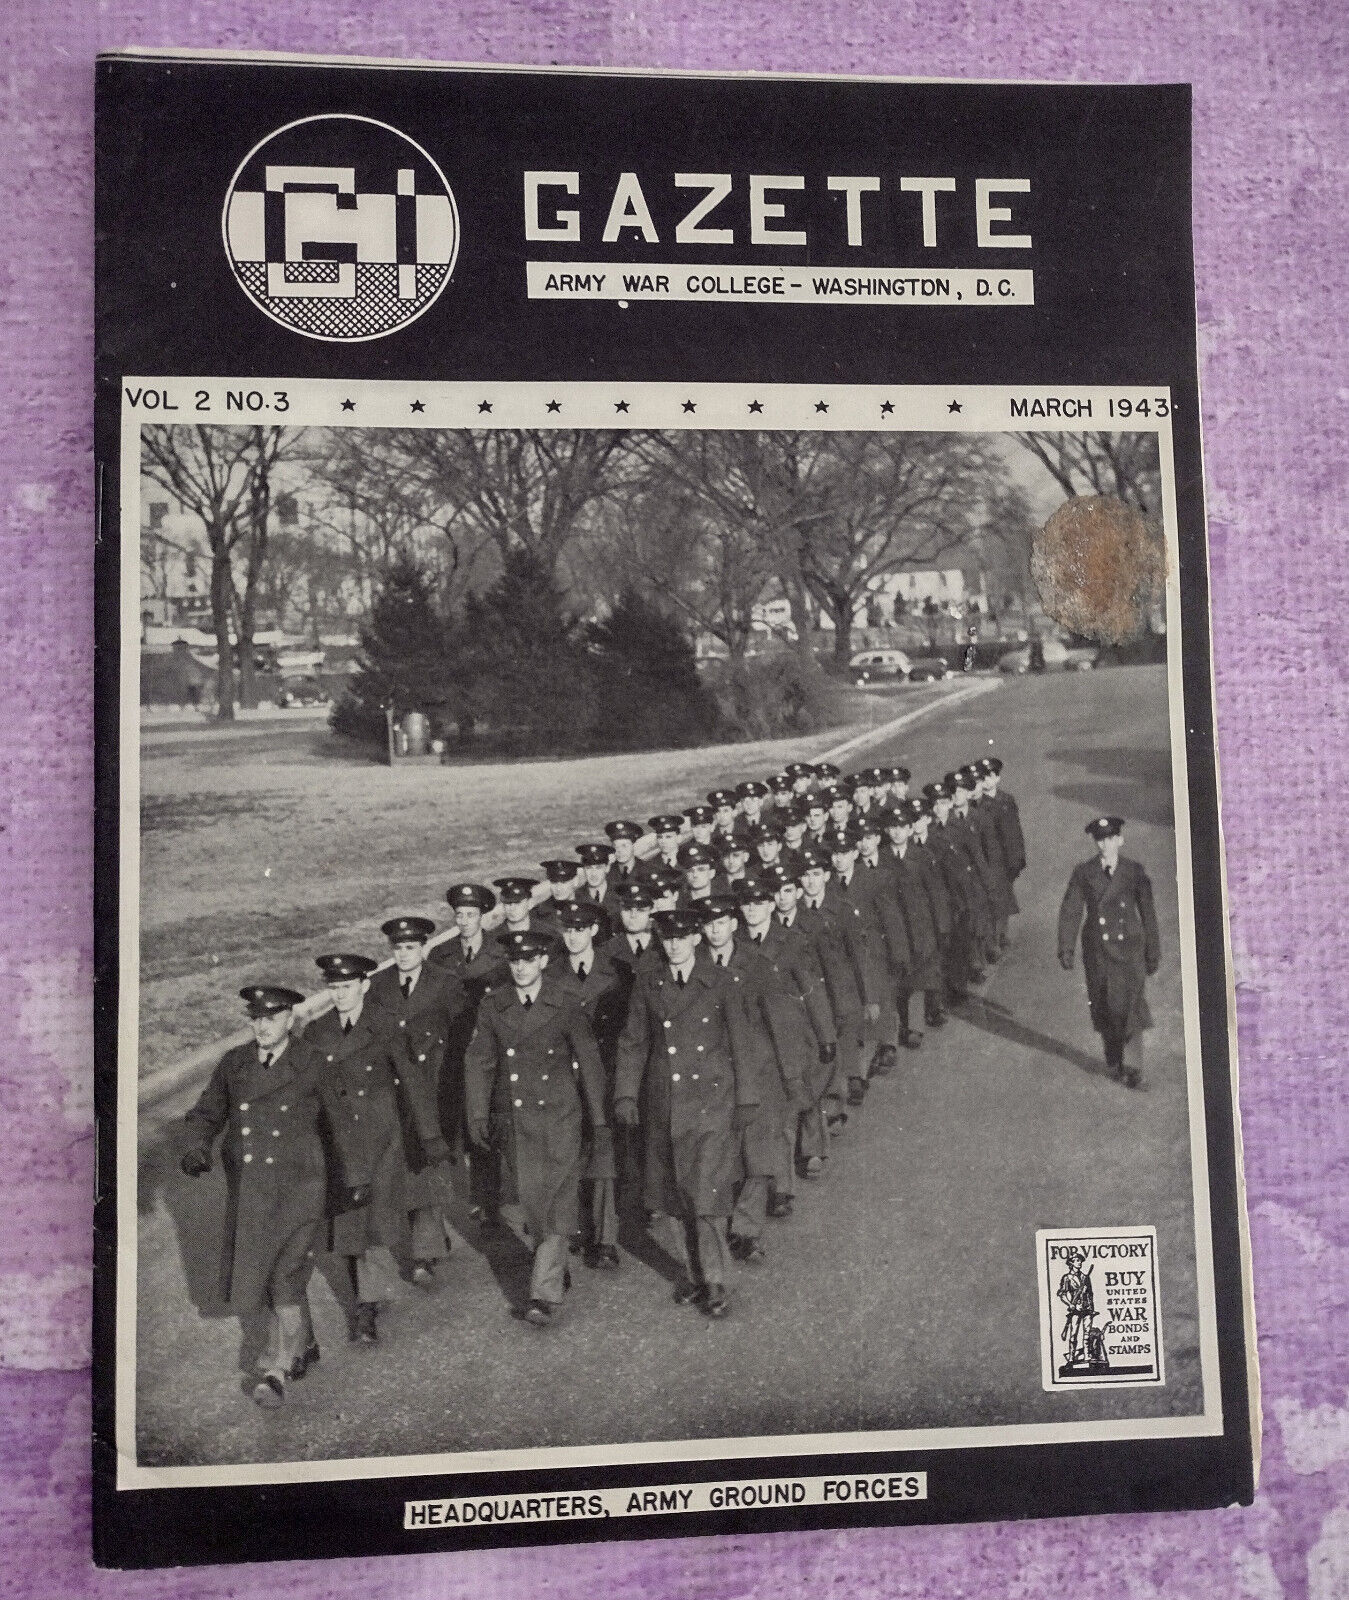 WWII G I Gazette Army War College March 1943 Army Ground Forces Military Vintage